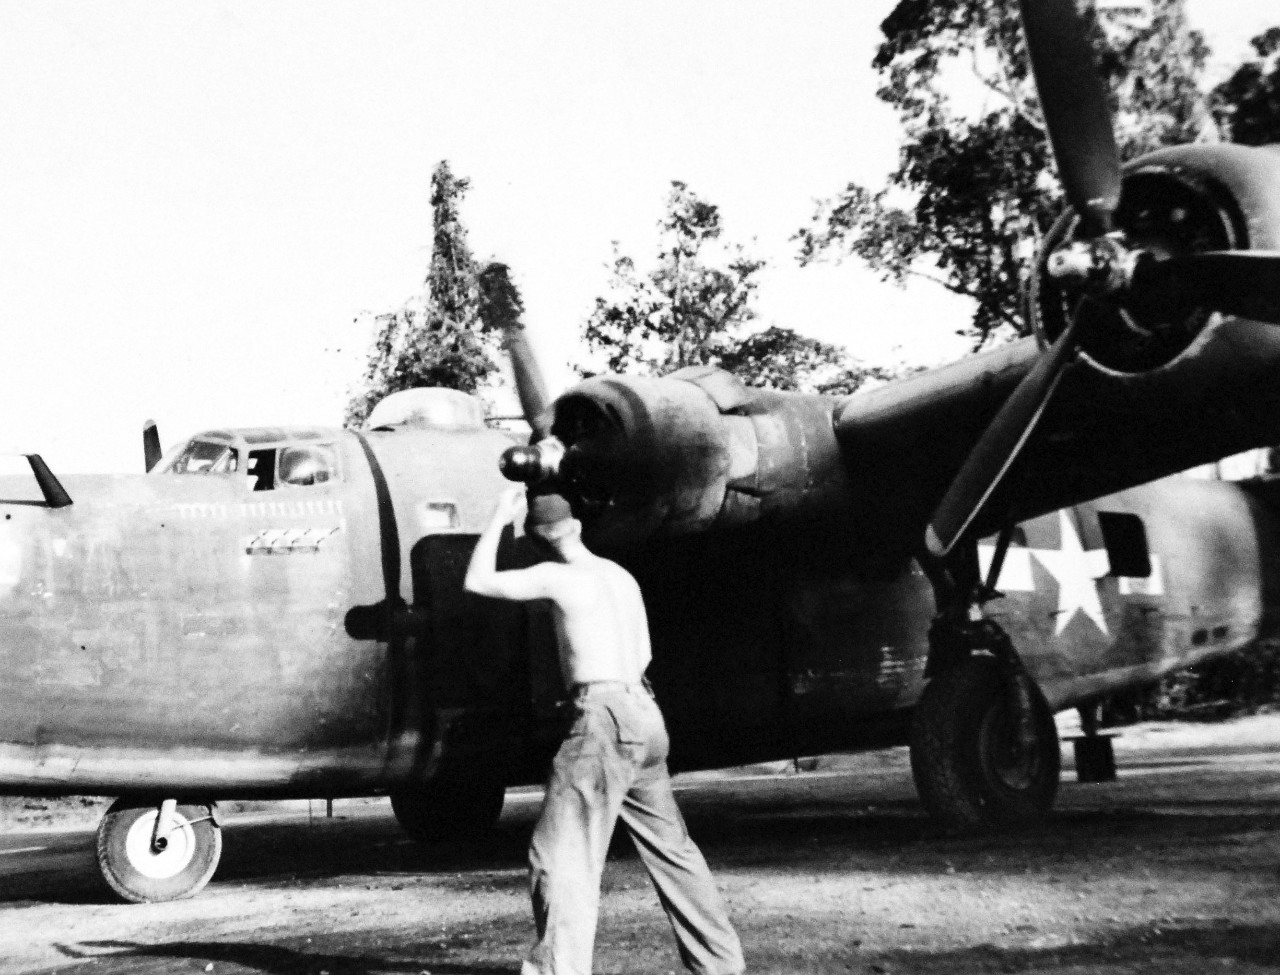 127-GW-520-80900:   Okinawa Campaign, April-June 1945.     All clear on Engine Two, and the flight will soon be ready to get under way.  The photo plane is a converted heavy bomber from which the bomb racks have been removed and the aerial cameras installed, PB4Y.   The silhouette of an aerial camera is painted on the nose of the plane for each mission, Okinawa.     Photographed by Chester L. Smith, April 1944.   Official U.S. Navy Photograph, now in the collections of the National Archives.   (2014/6/25).